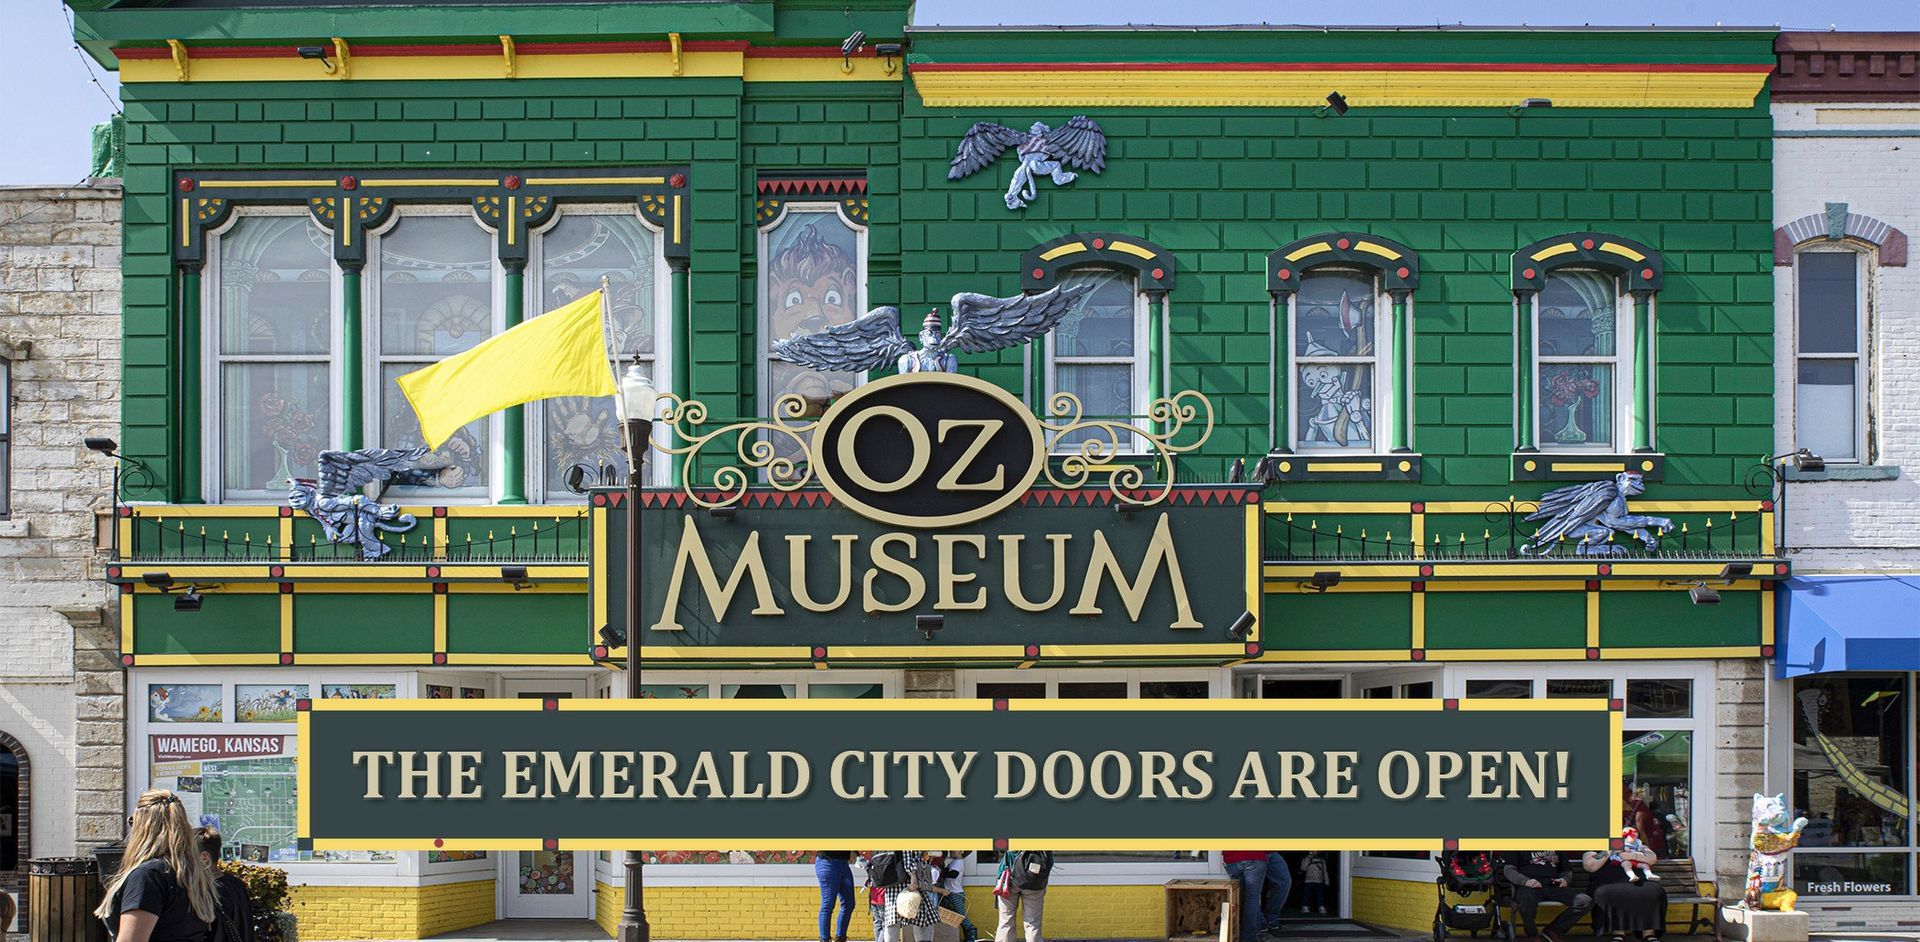 World’s Largest Collection of Oz Memorabilia: world record in Wamego, Kansas